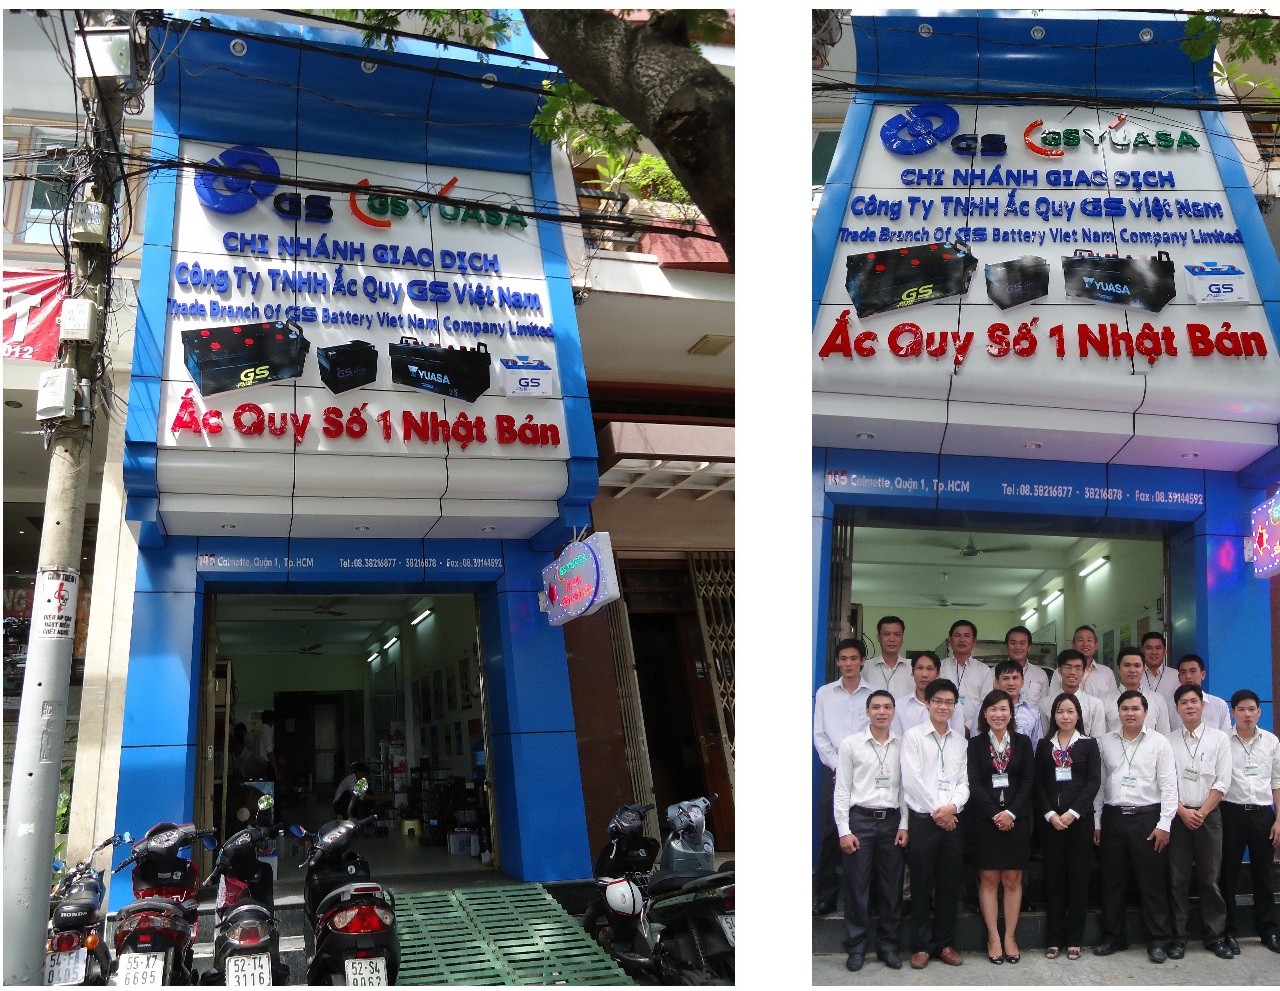 Ho Chi Minh Branch of GS Battery Viet Nam grand opening new signboard.